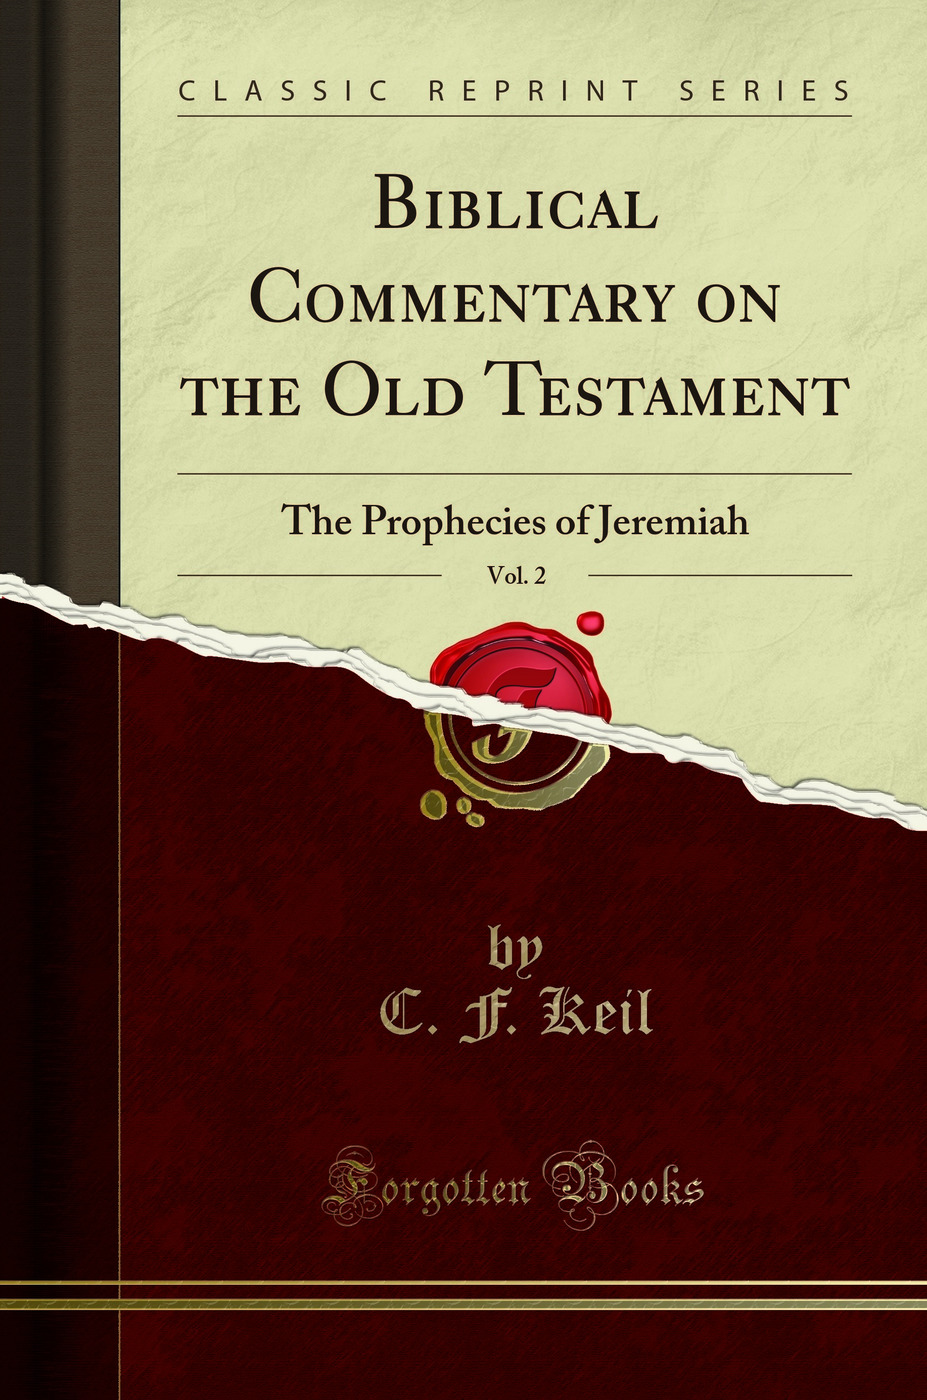 Biblical Commentary on the Old Testament, Vol. 2: The Prophecies of Jeremiah - C. F. Keil, F. Delitzsch